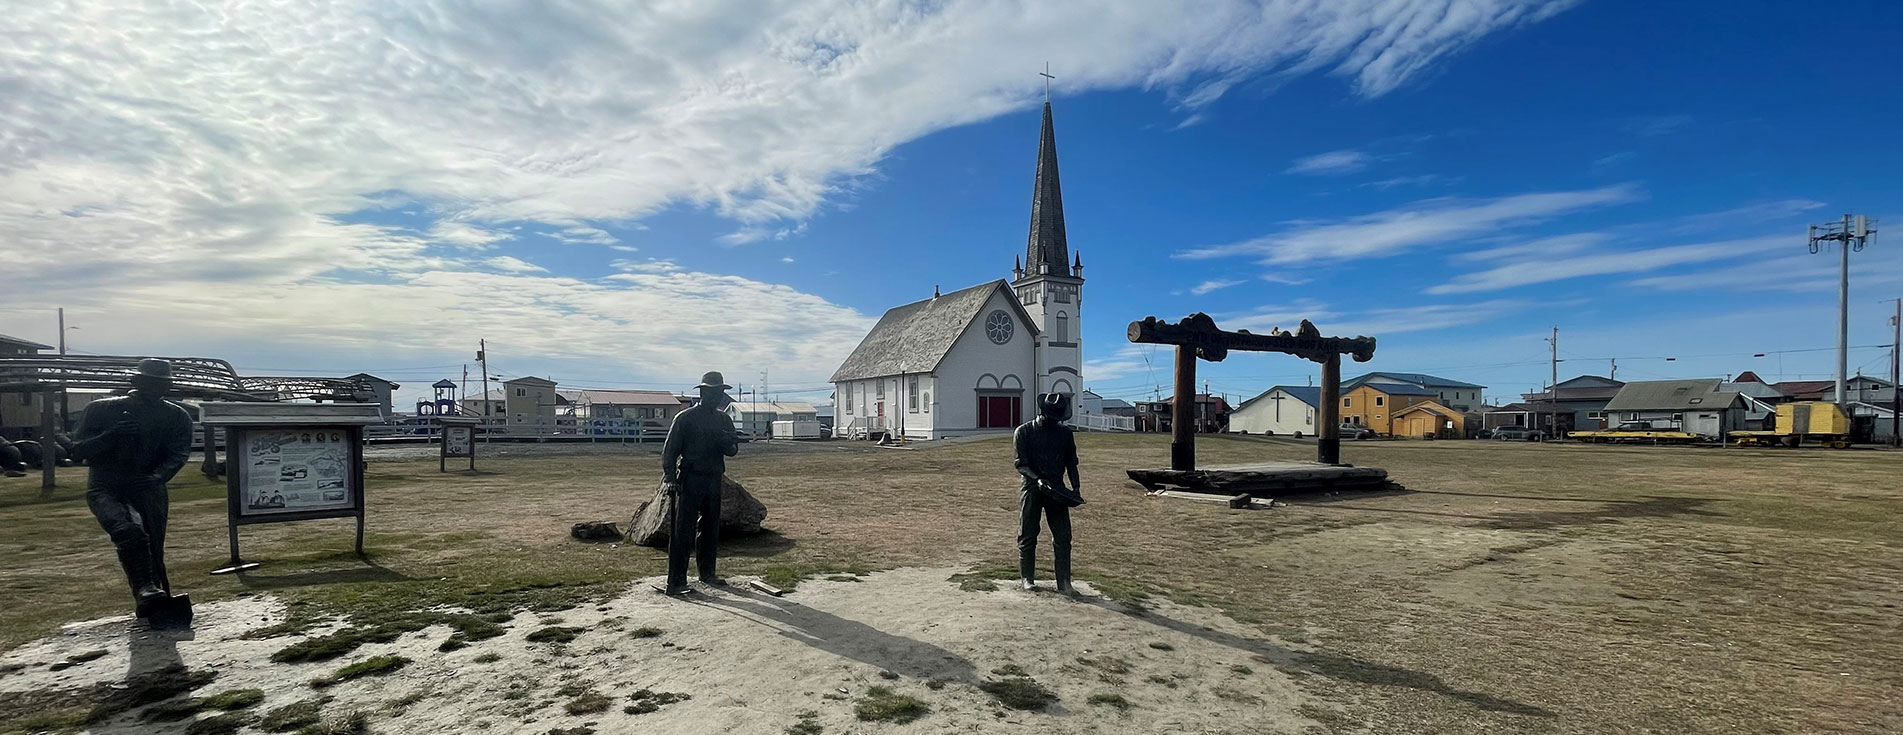 Statues and the Iditarod finish line are pictured in the foreground. A church and other buildings in the city of Nome, Alaska are pictured in the background.